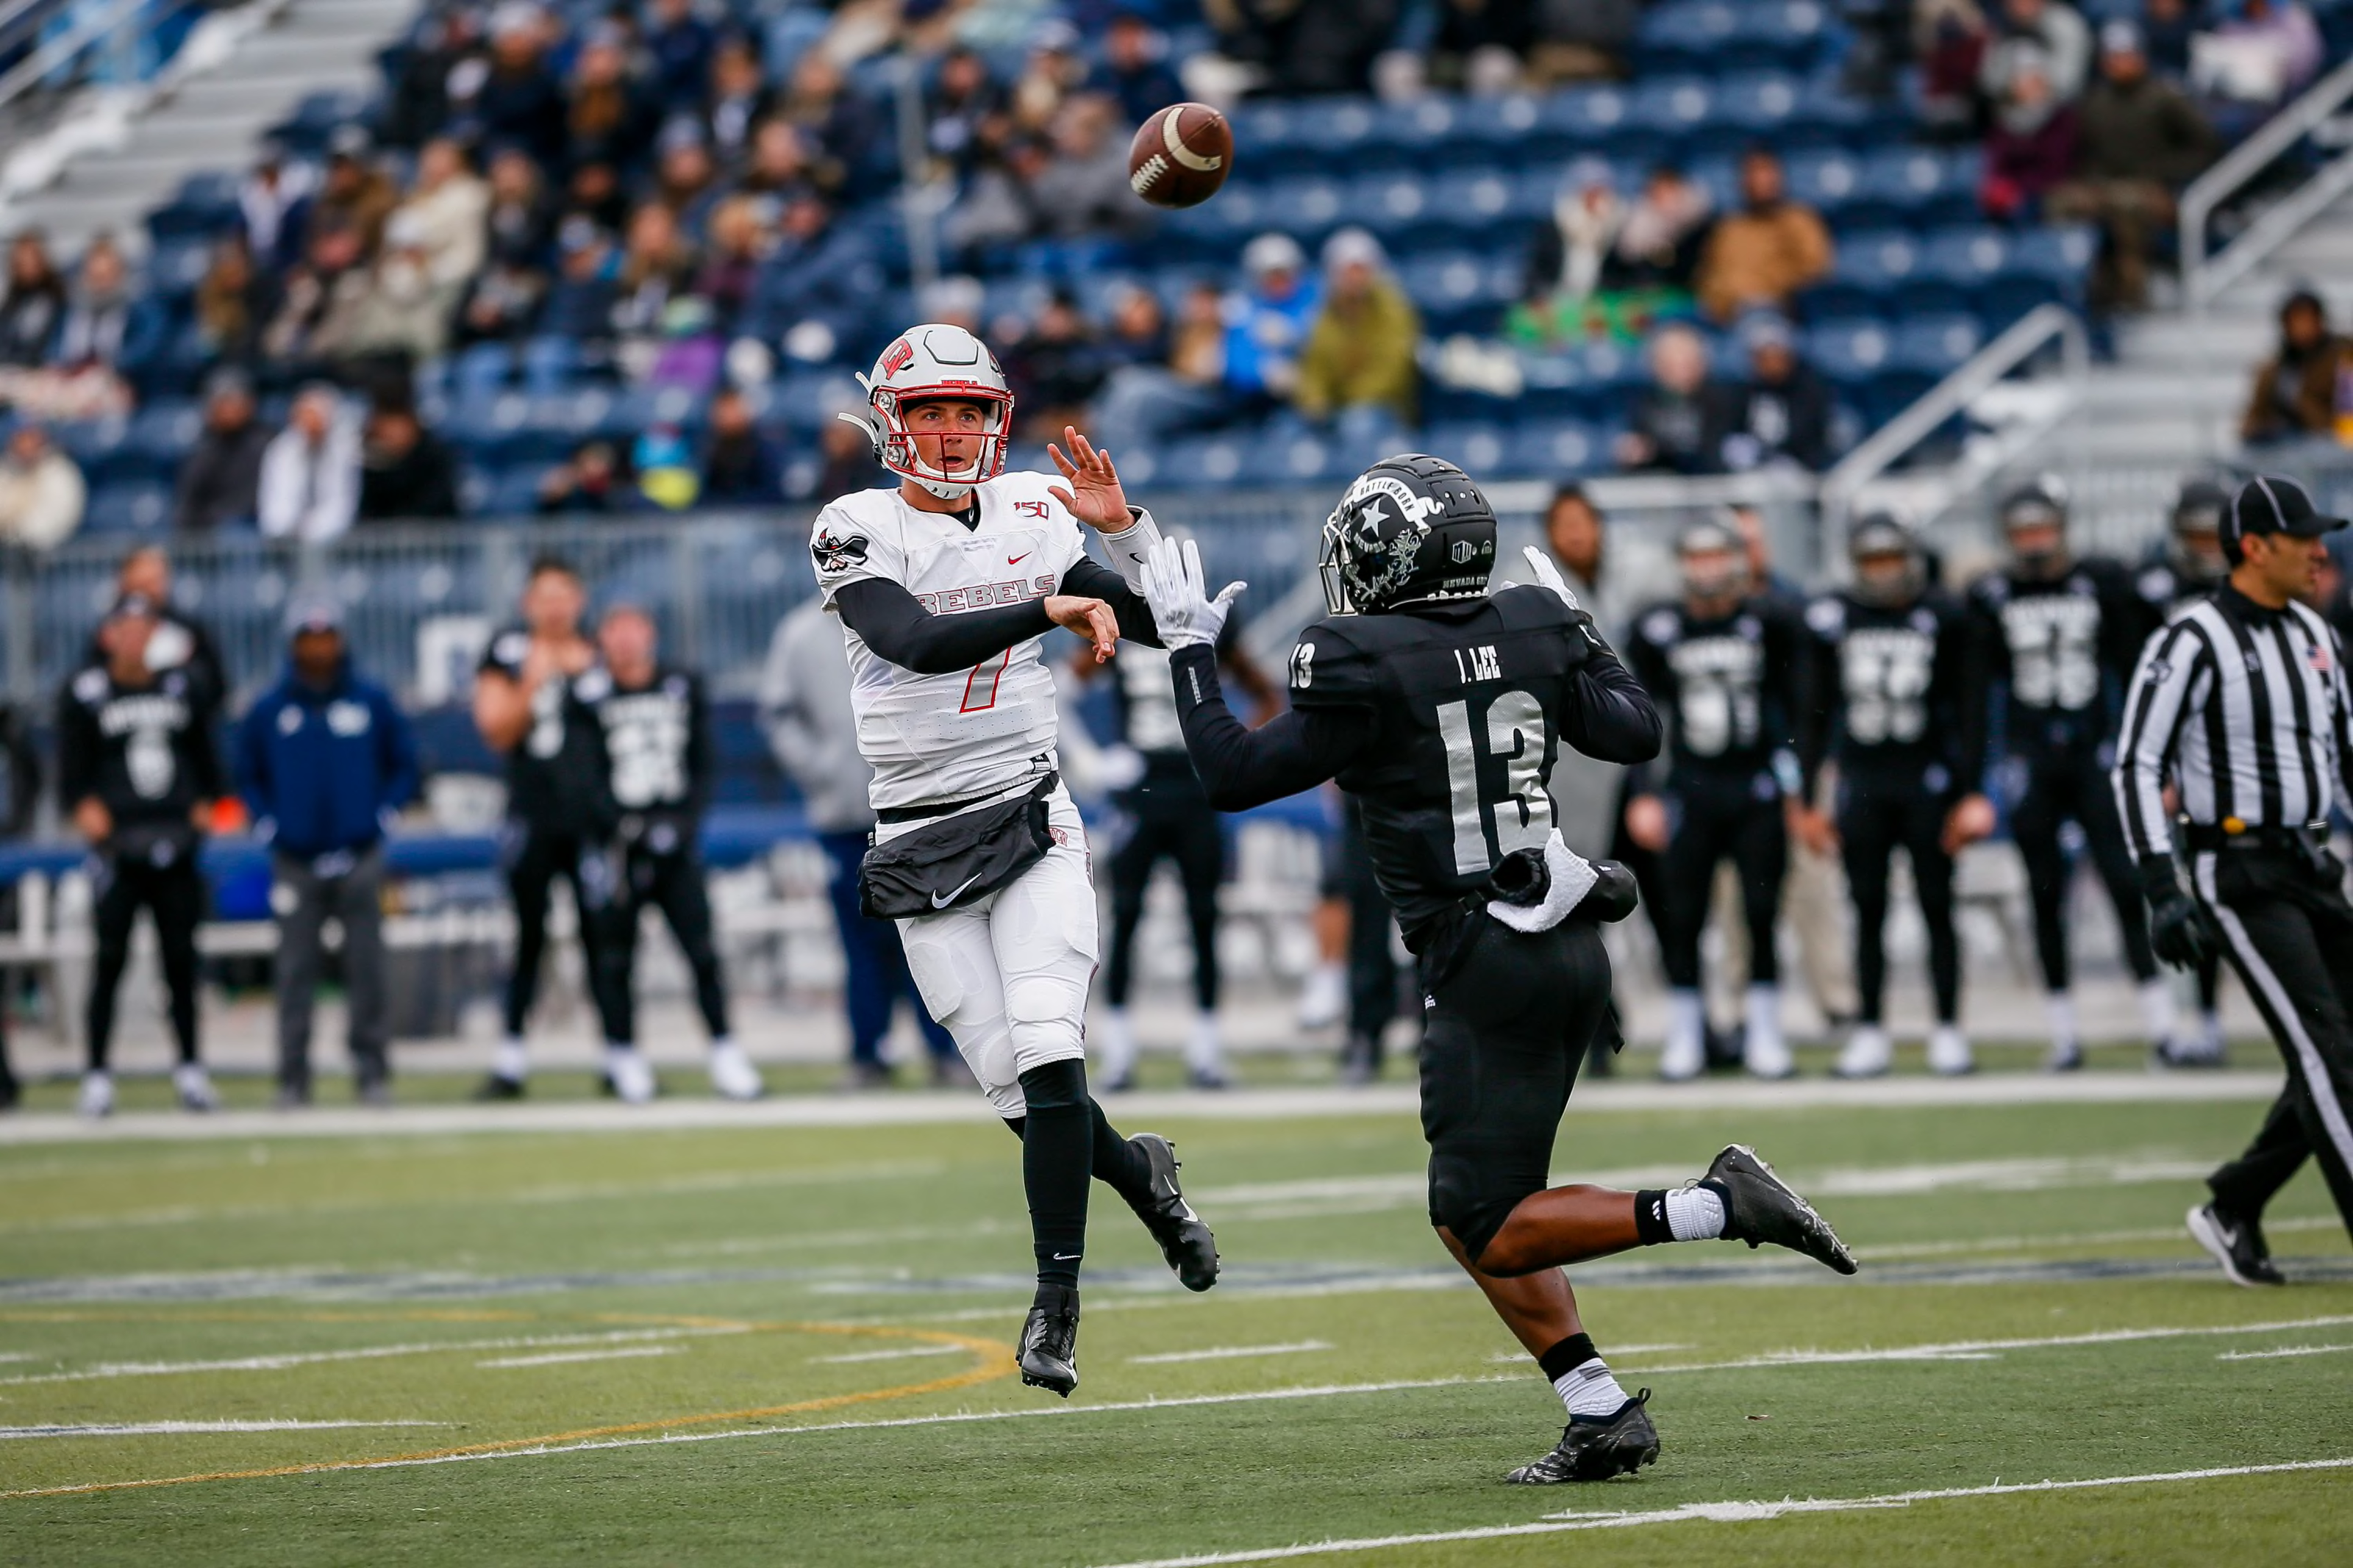 UNLV Football: Can Marcus Arroyo turn things around in 2020? - Page 2